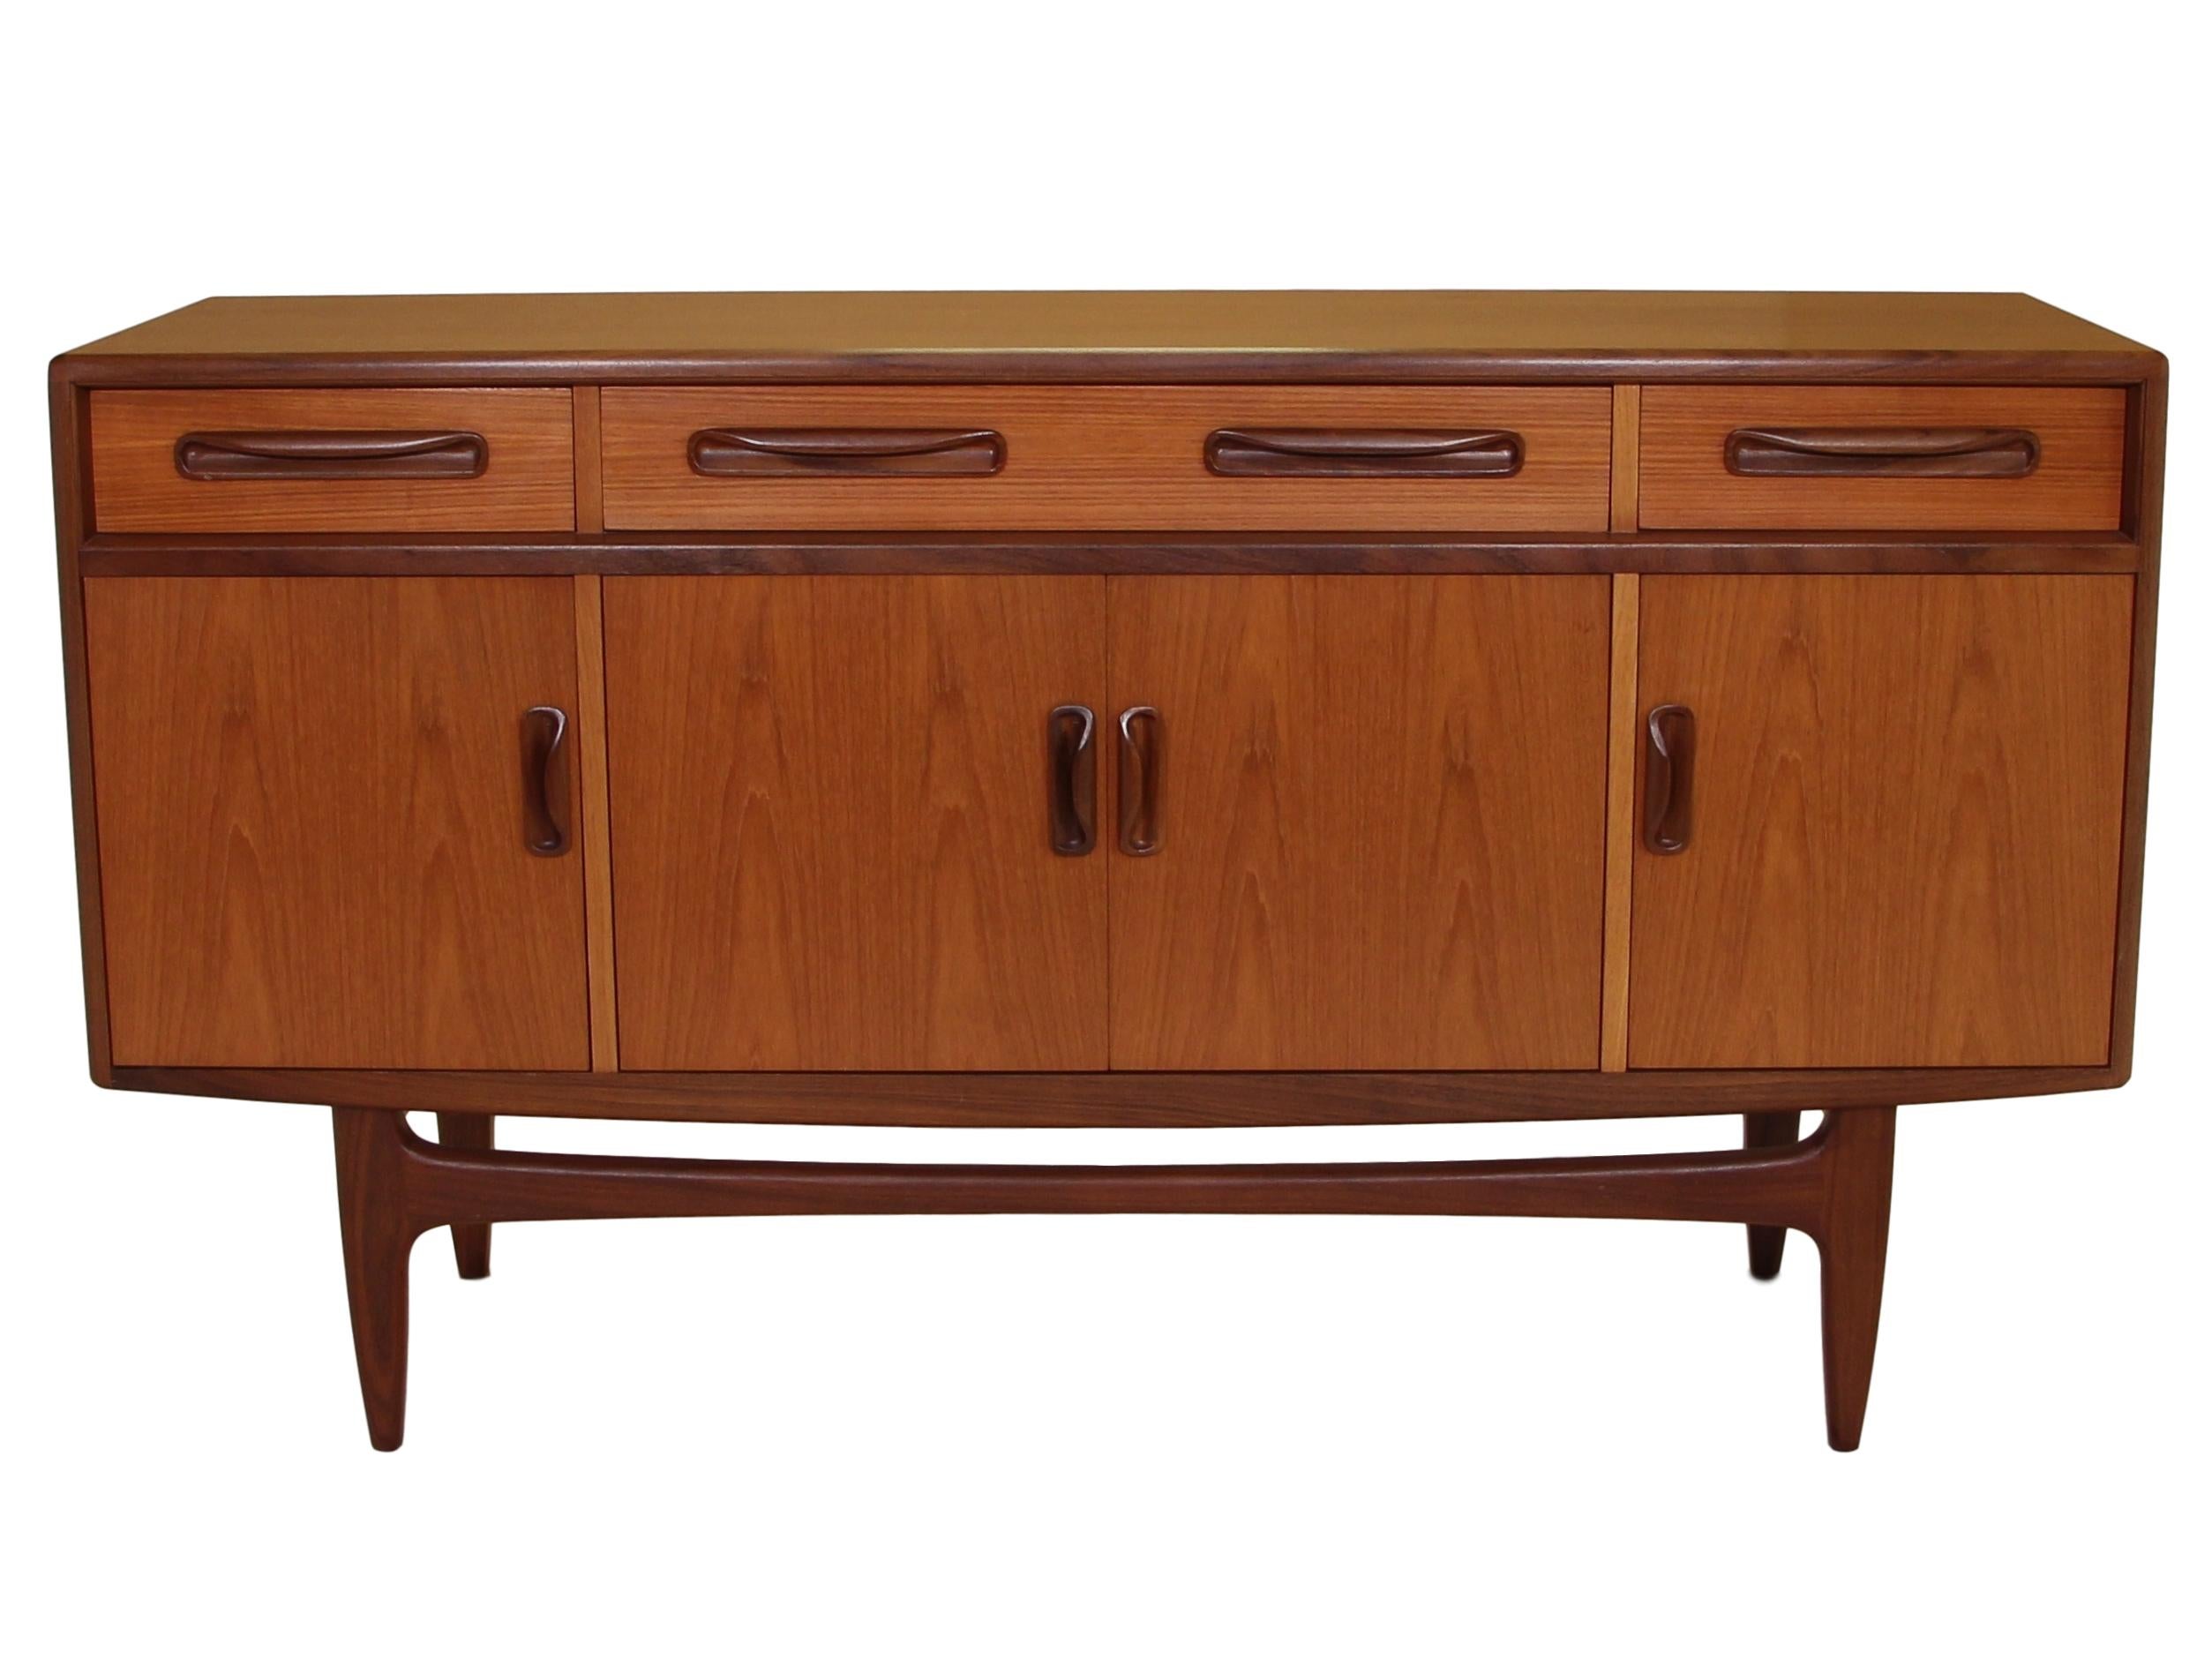 Outstanding small teak credenza. It was designed in the 1960s by Victor Bramwell Wilkins for G Plan's Fresco Range. It has original light blue fabric which is in good condition.

Style: Danish modern.

It is in very good condition. There are